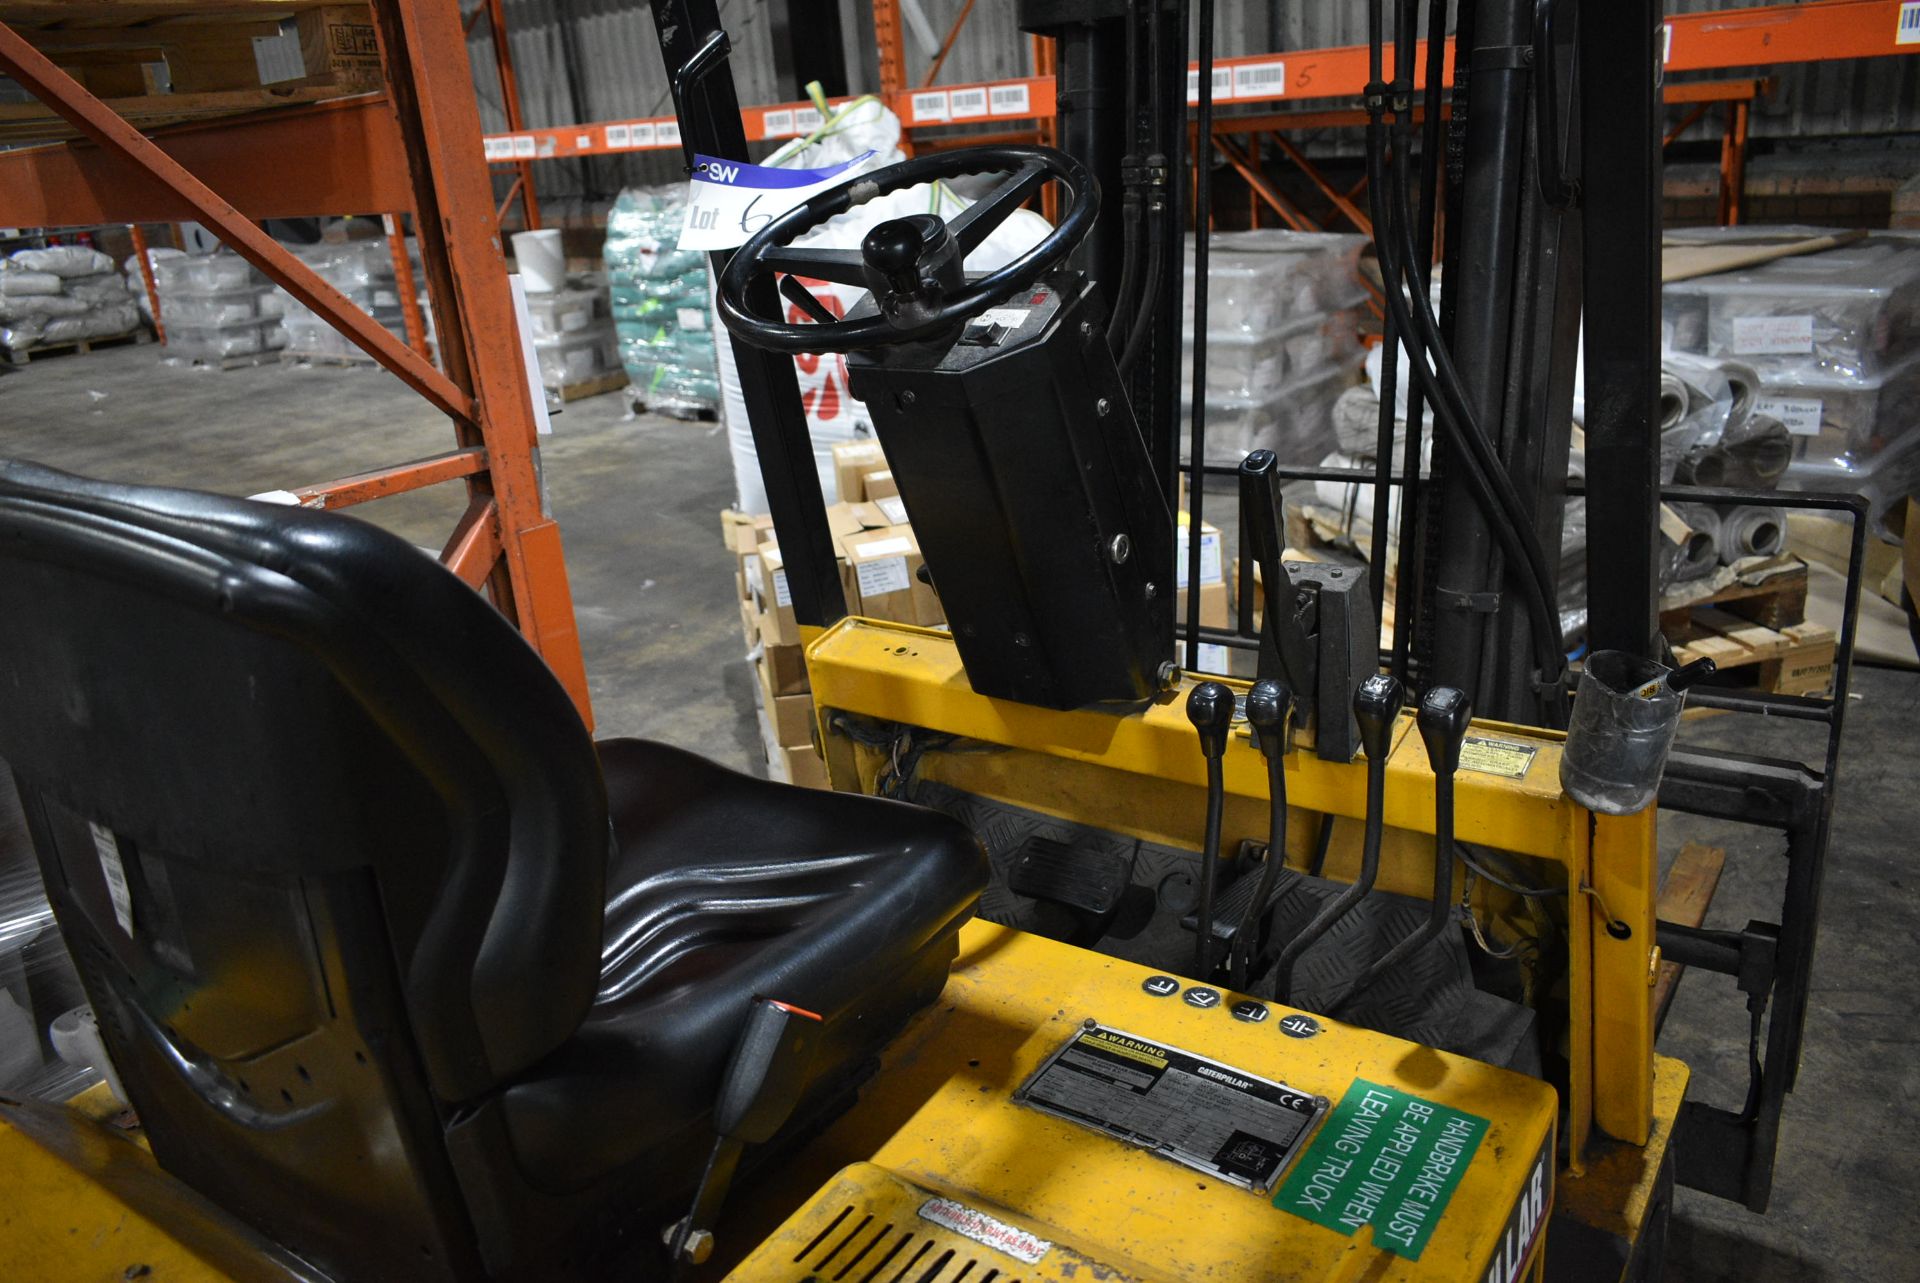 Caterpillar EP18T 1750kg capacity BATTERY ELECTRIC THREE WHEEL FORK LIFT TRUCK, serial no. 5TM02407, - Image 5 of 9